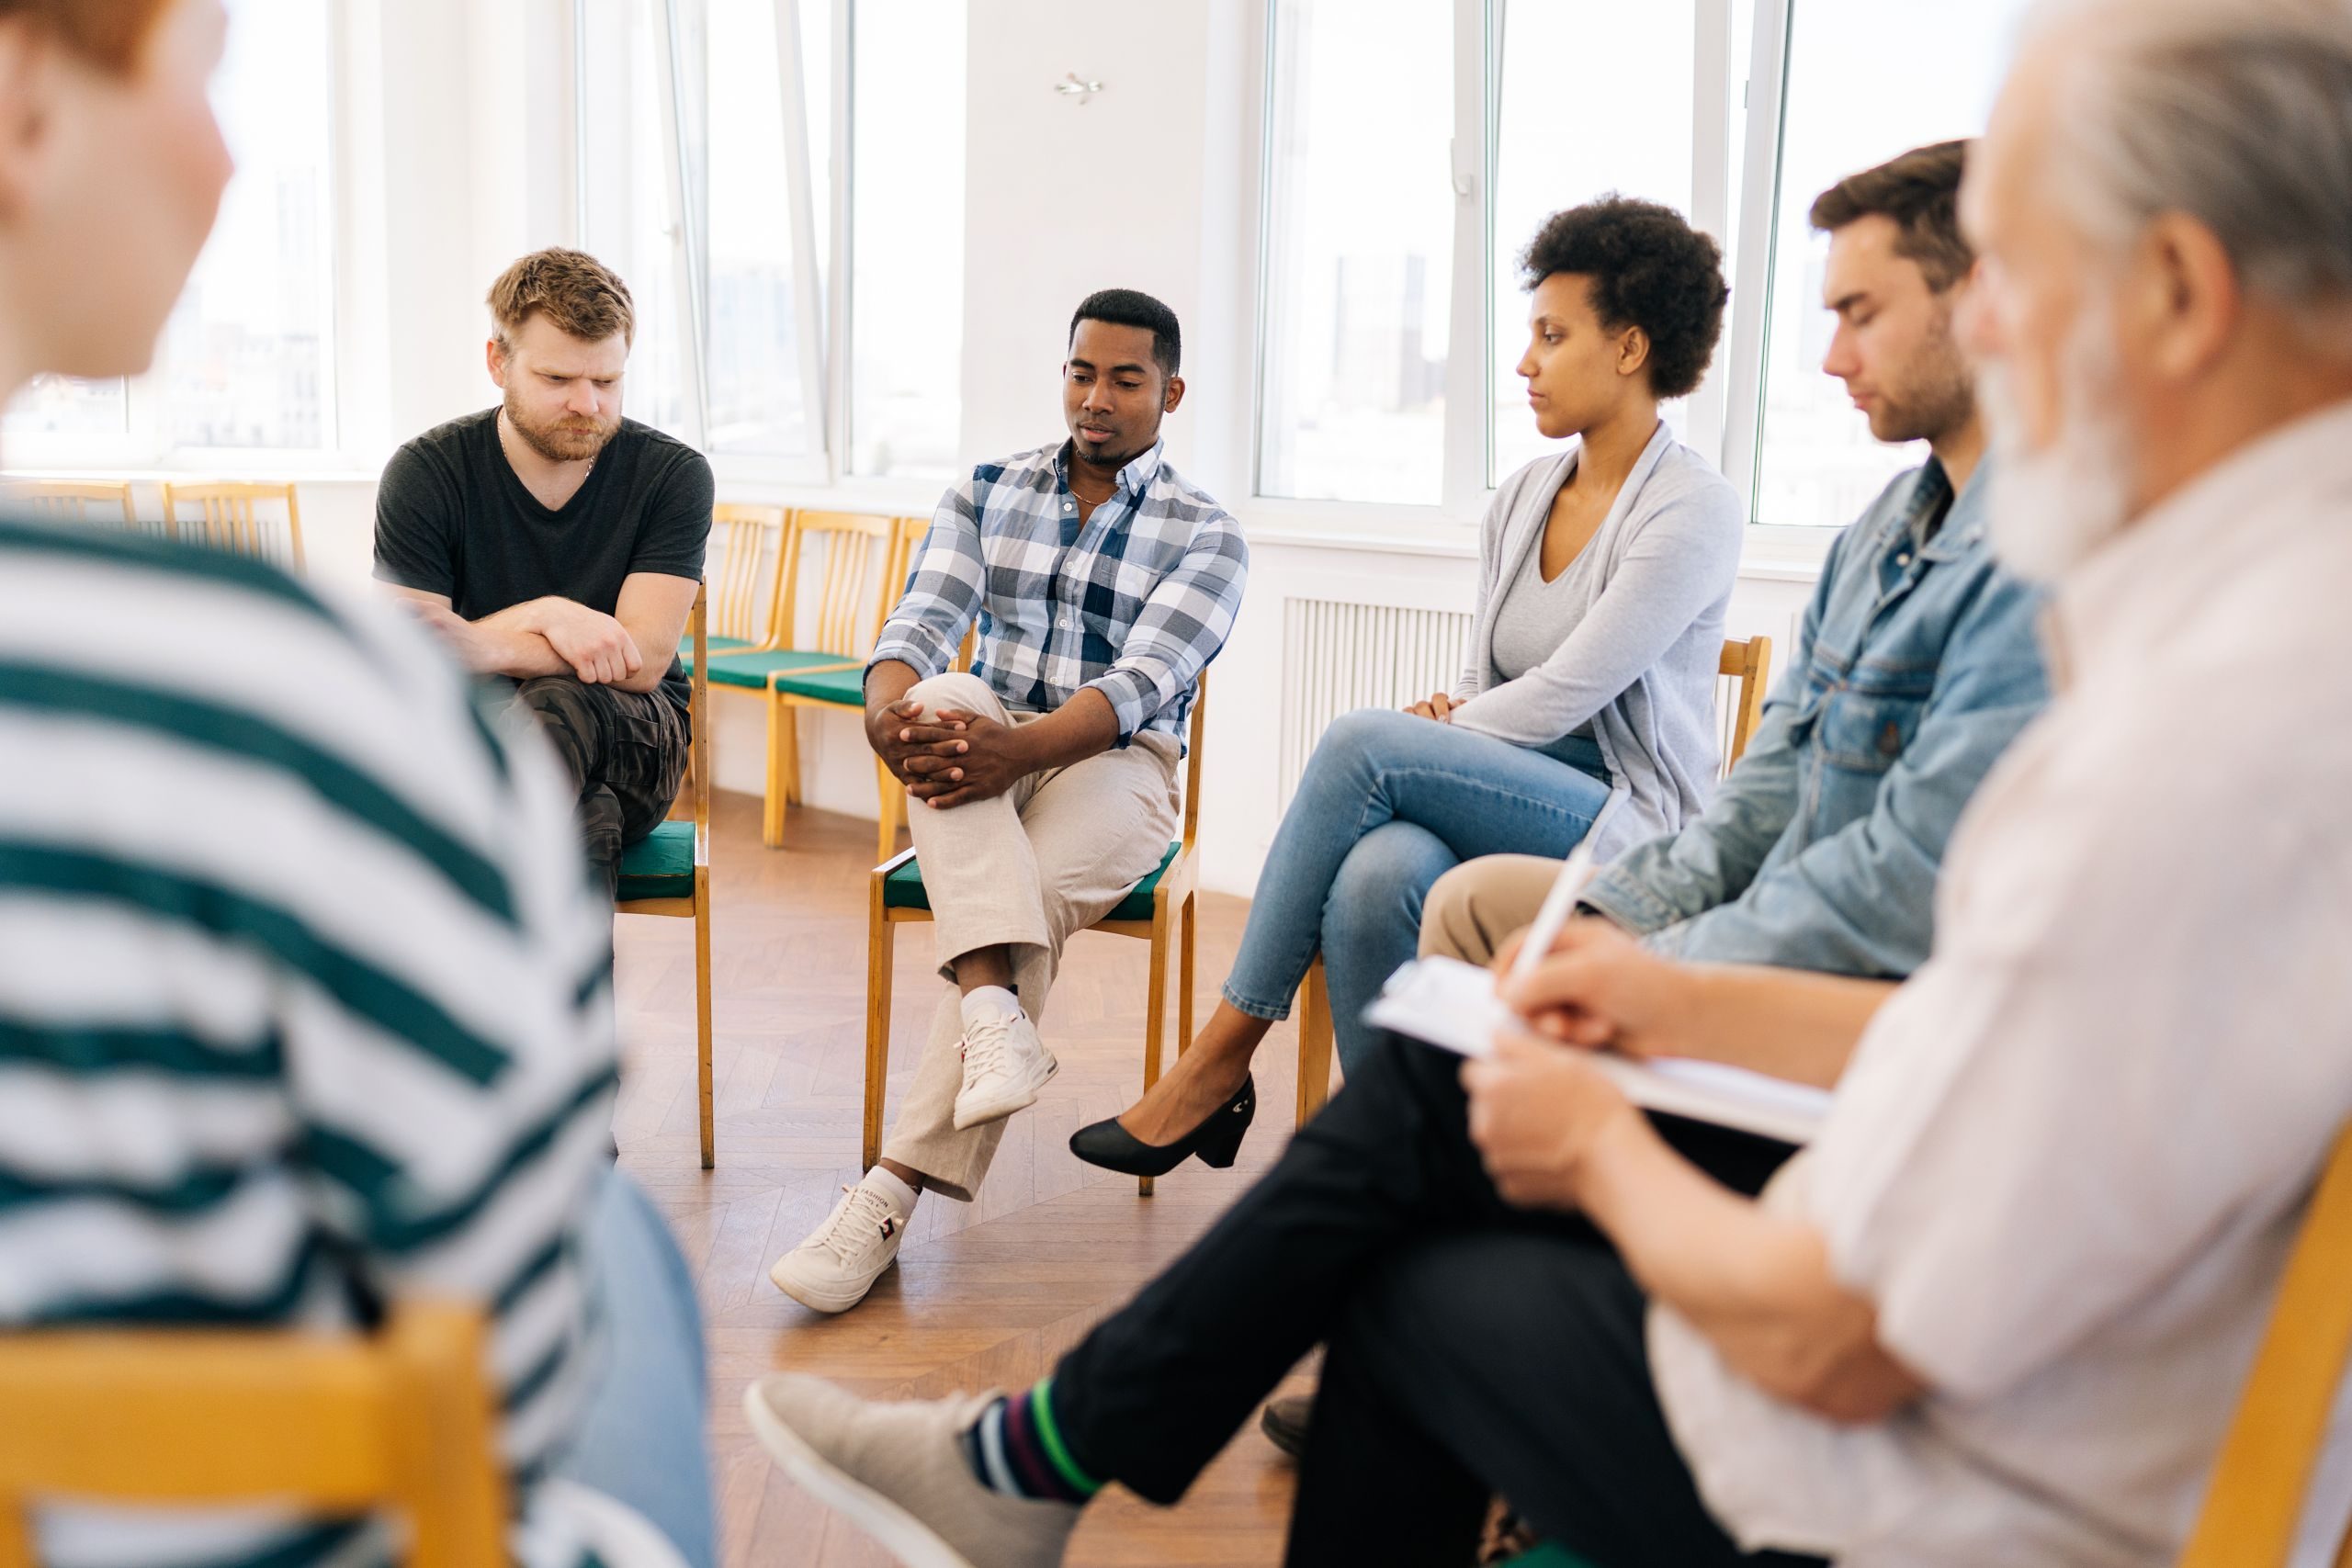 A group therapy session discussing Addiction and Mental Health